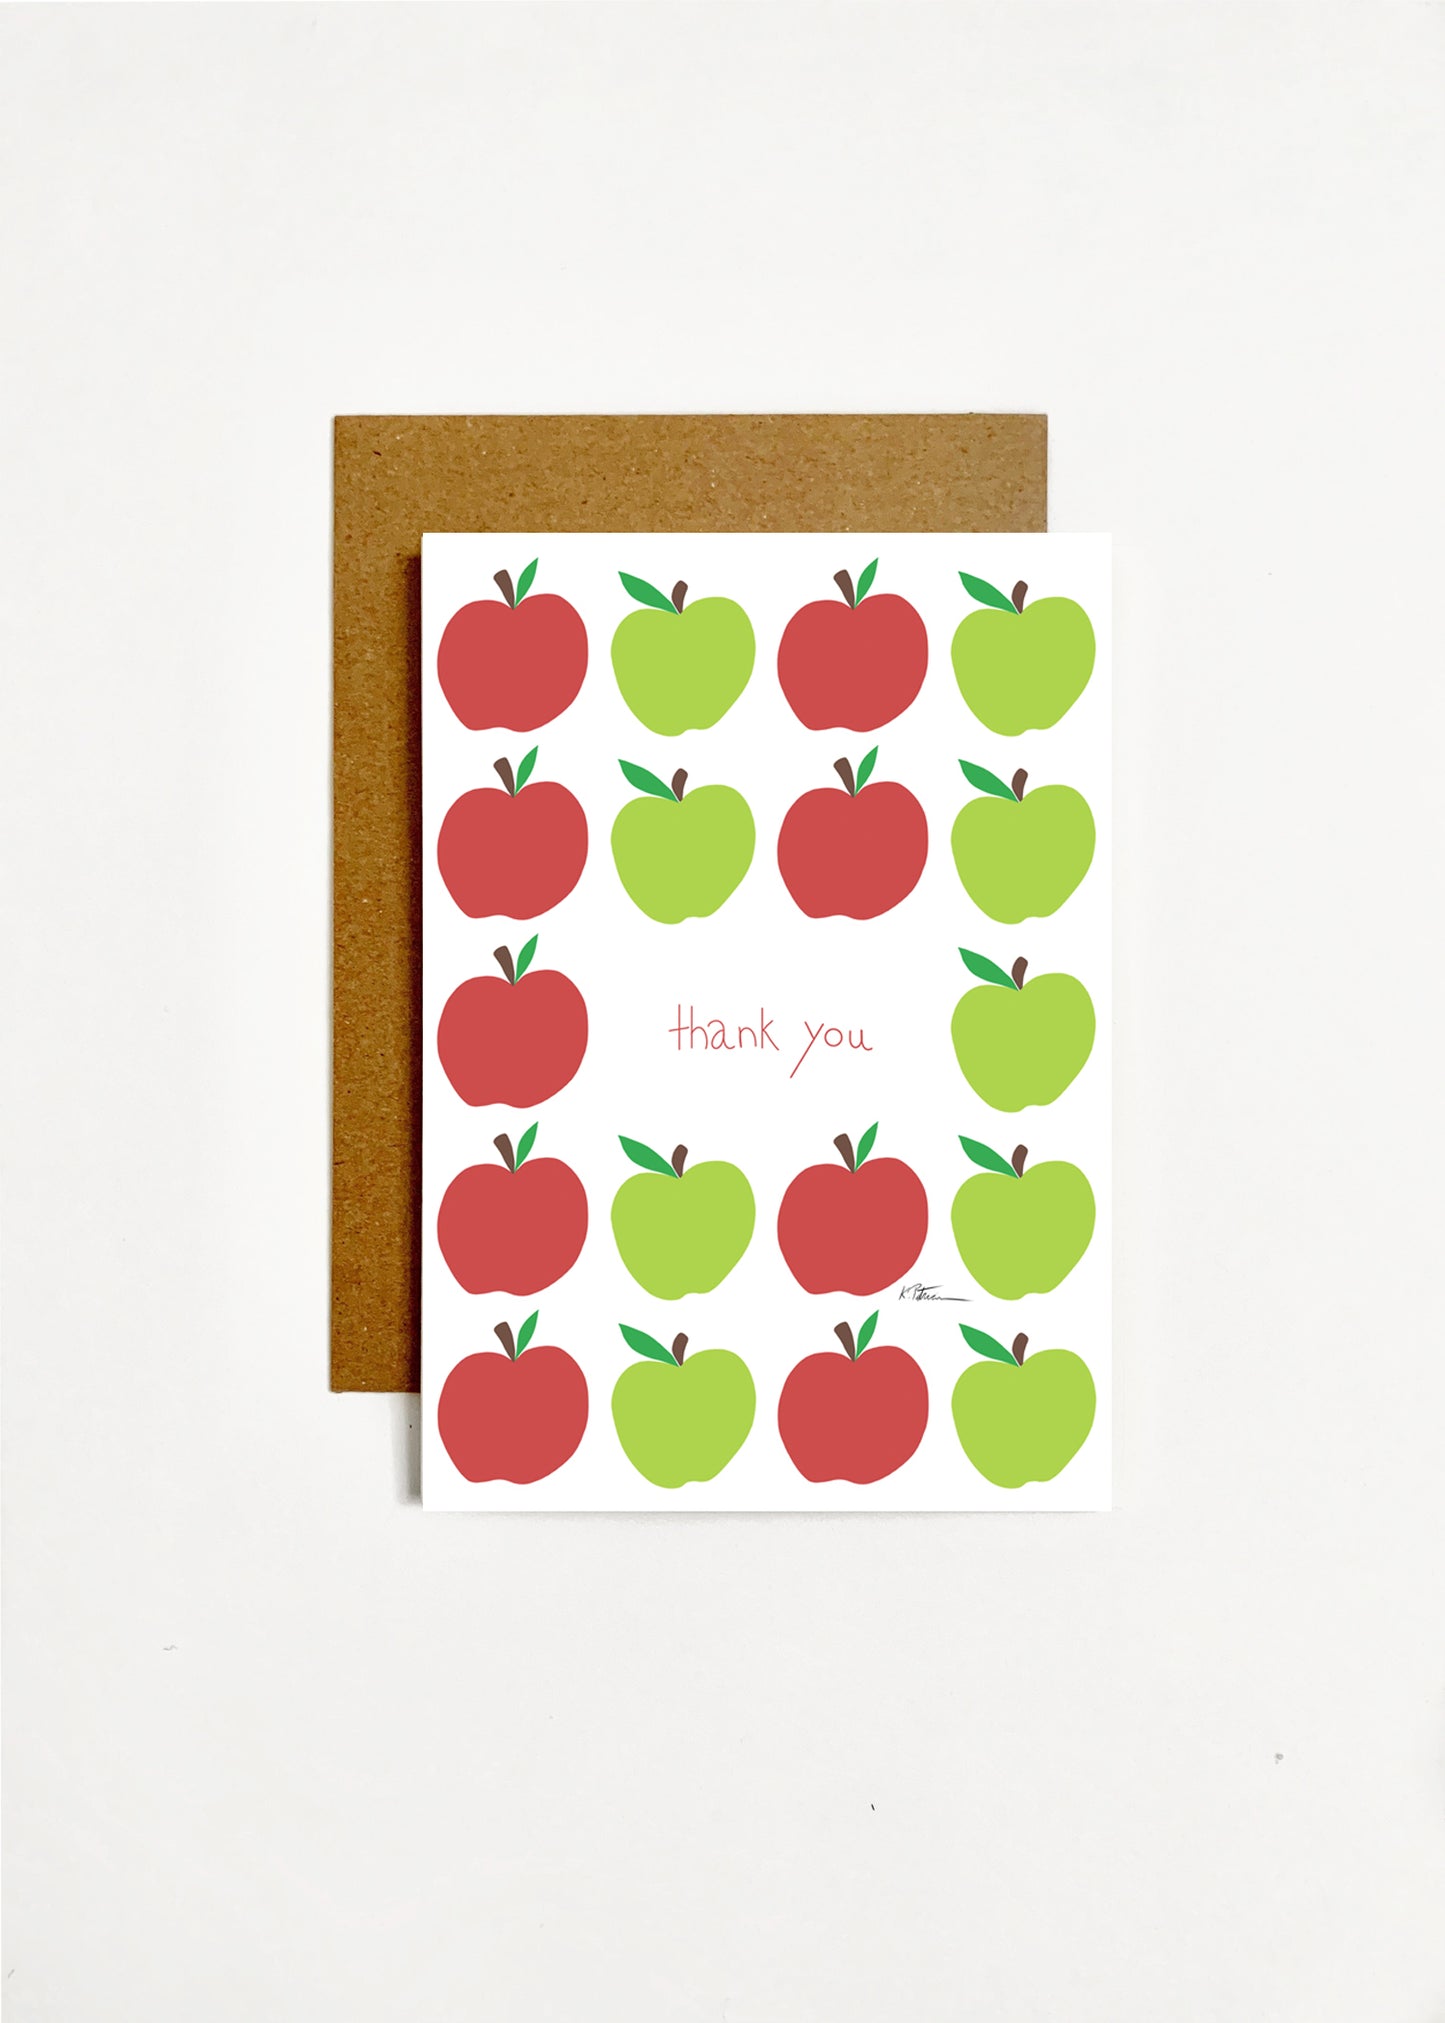 Thank You - Red + Green Apples